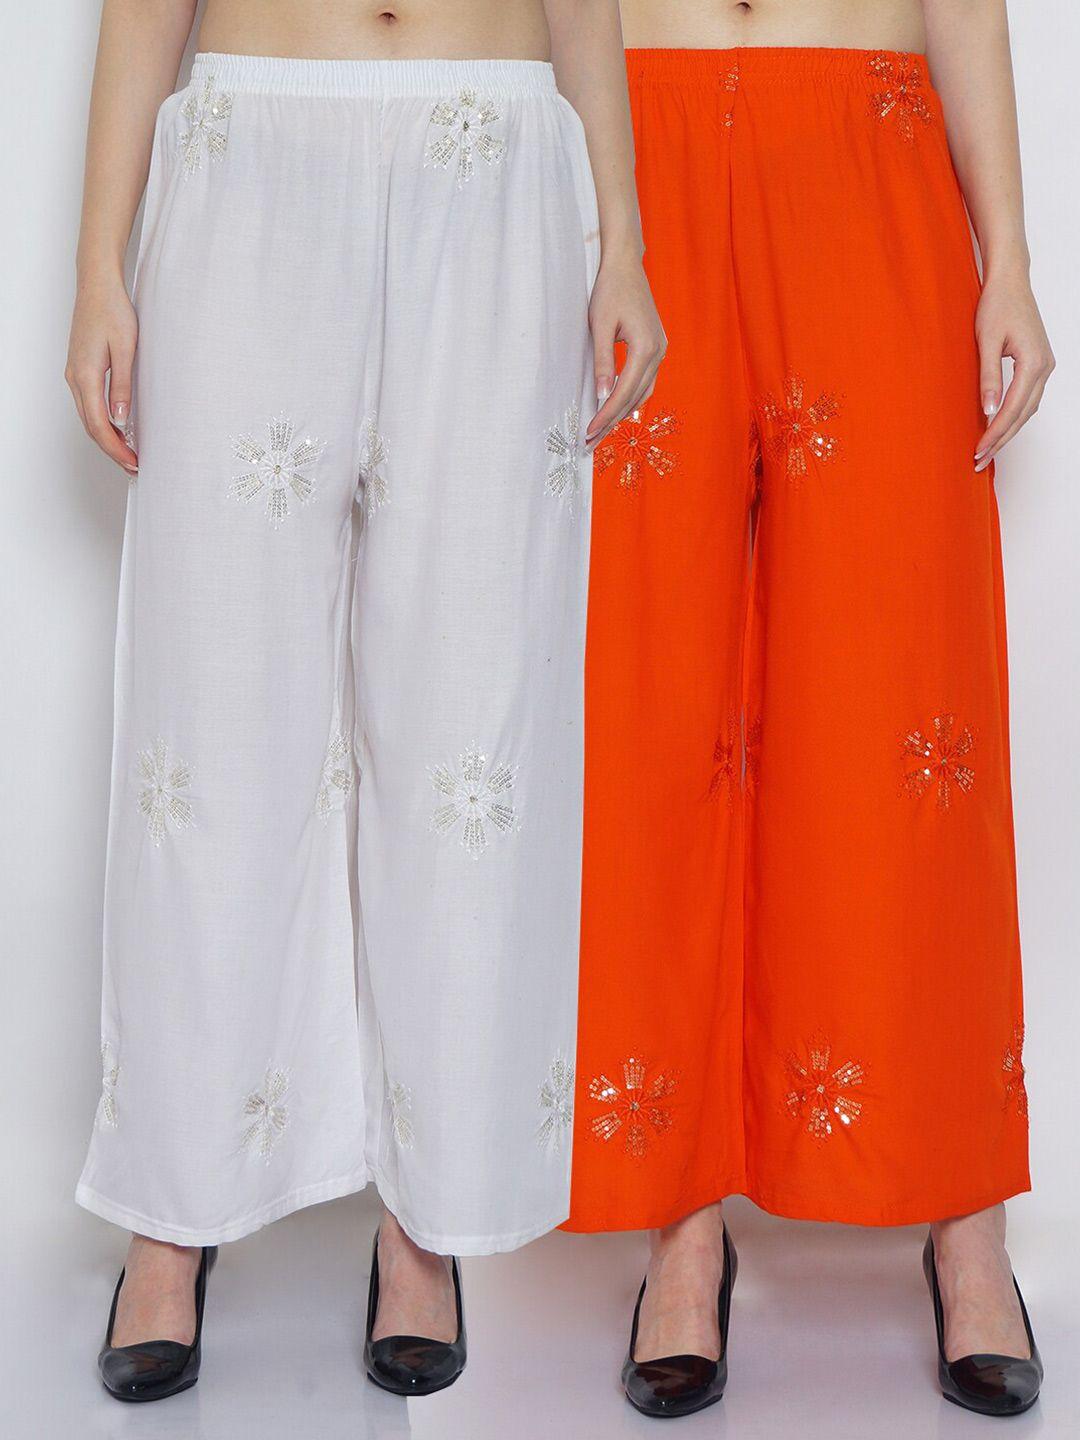 jinfo women white & orange 2 ethnic motifs embroidered flared knitted ethnic palazzos